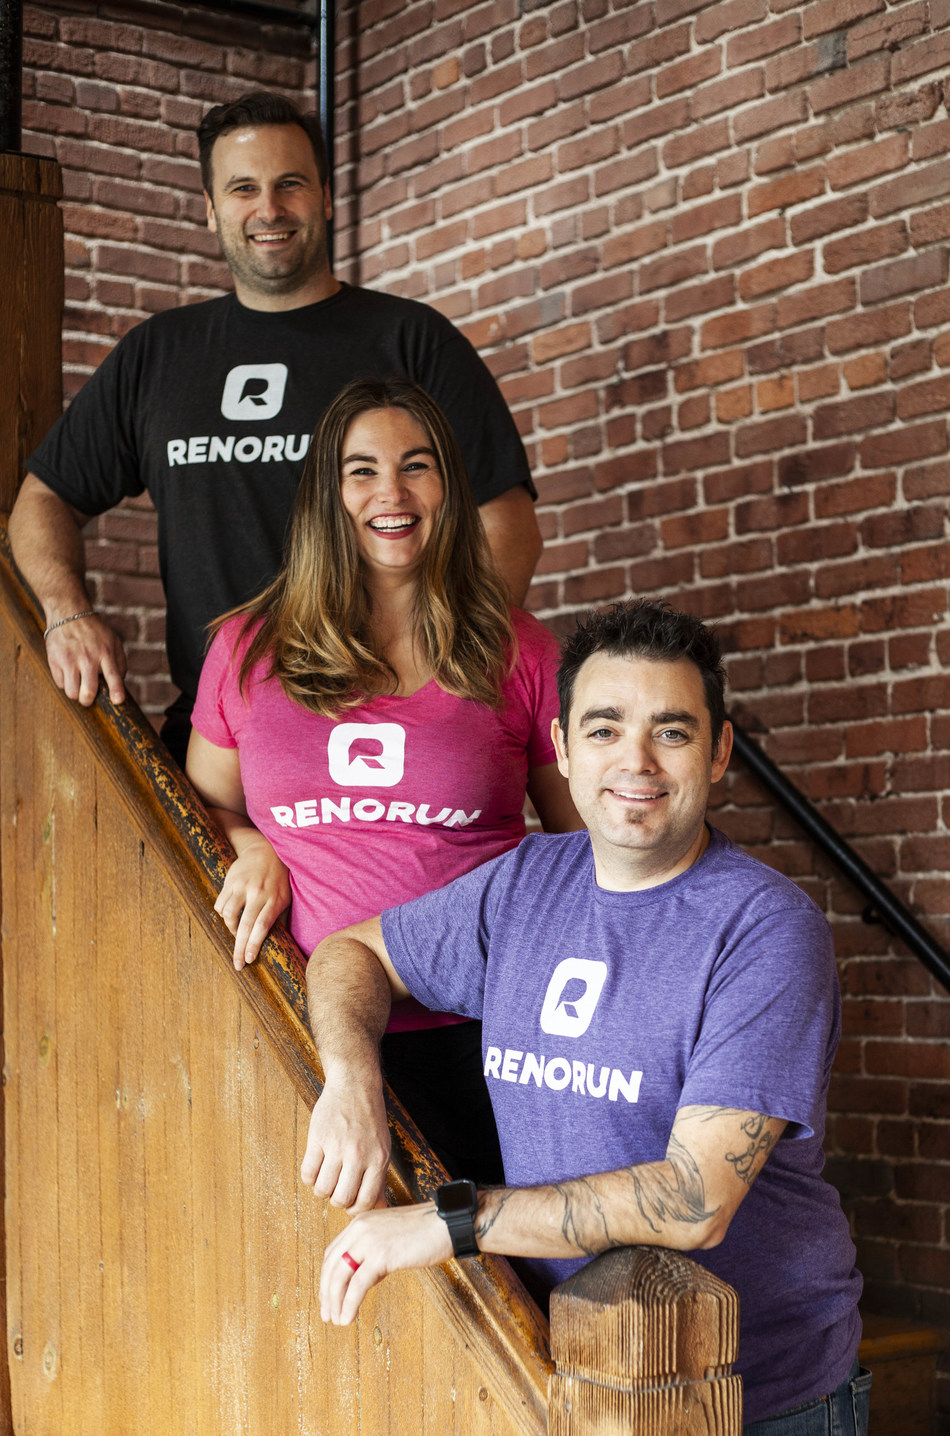 RenoRun, founded by Eamonn O'Rourke (front), Joelle Chartrand (middle), and Devlin Chartrand (back), saves contractors time and money by planning, sourcing and delivering scheduled or just-in-time building supplies and materials in less than two hours directly to the jobsite.